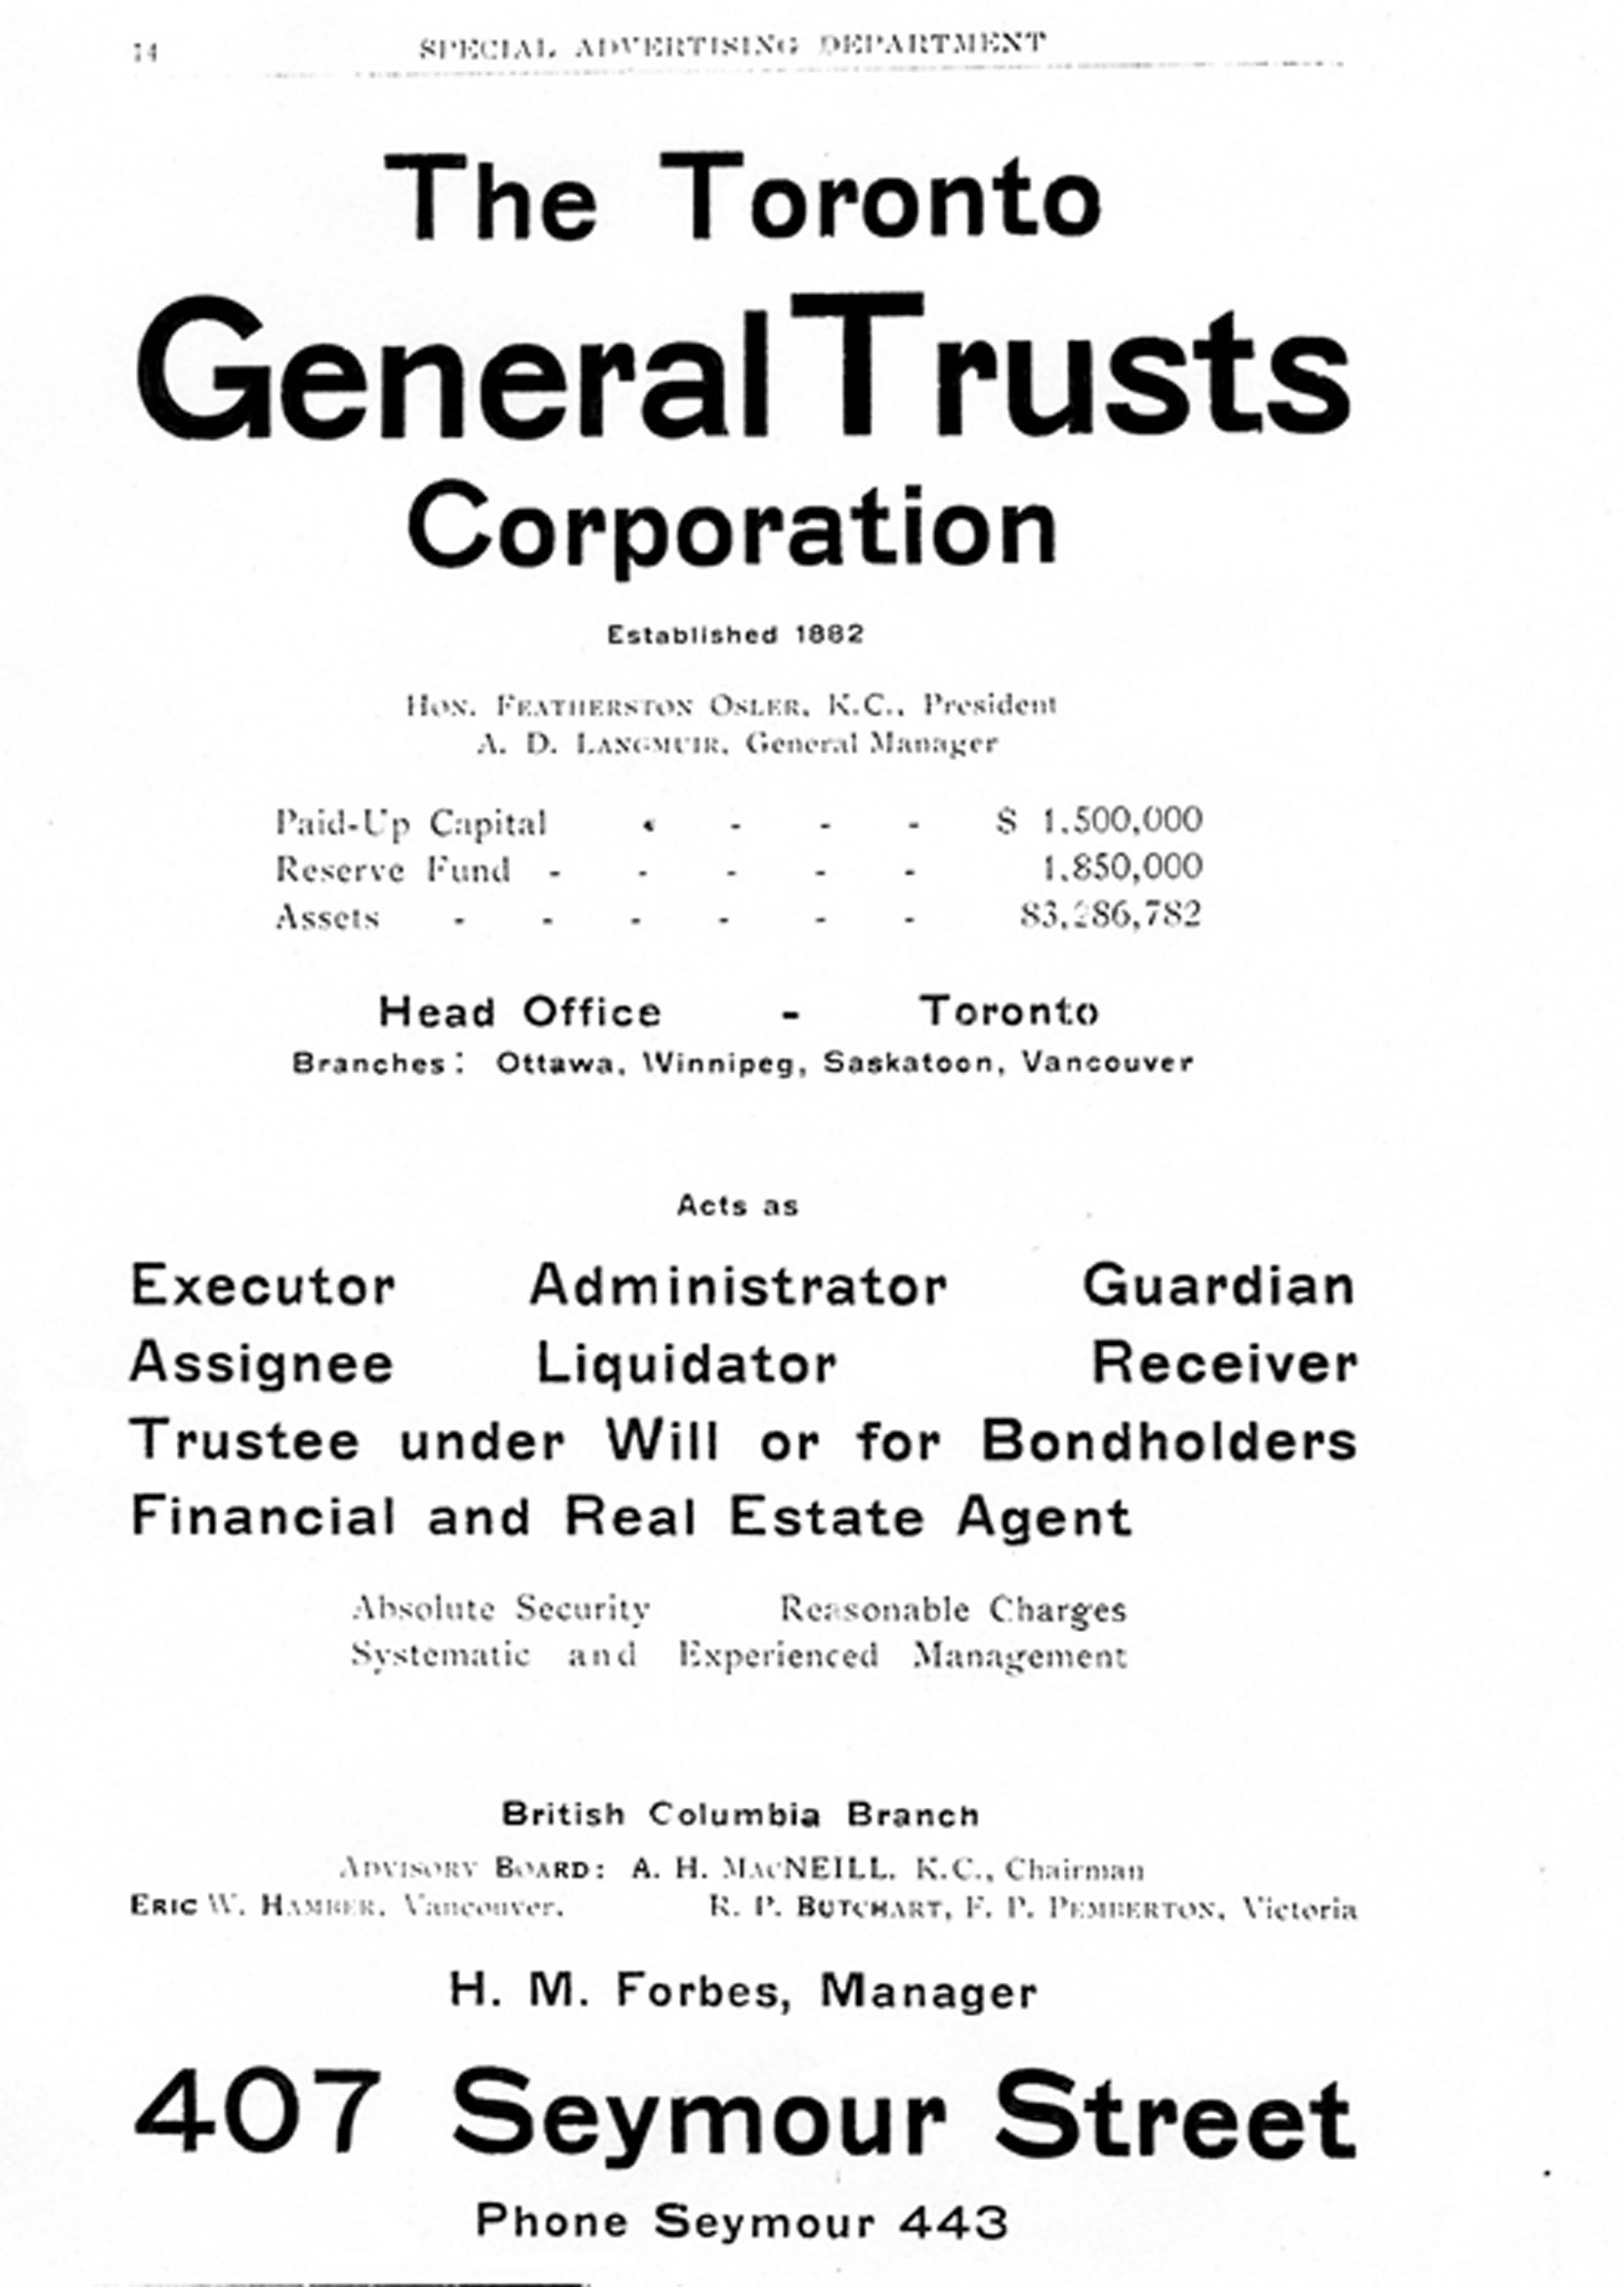 1921 advertisement for the Toronto General Trusts Corporation. Robert Butchart served on the company's B.C. Advisory Board. (Author's collection)